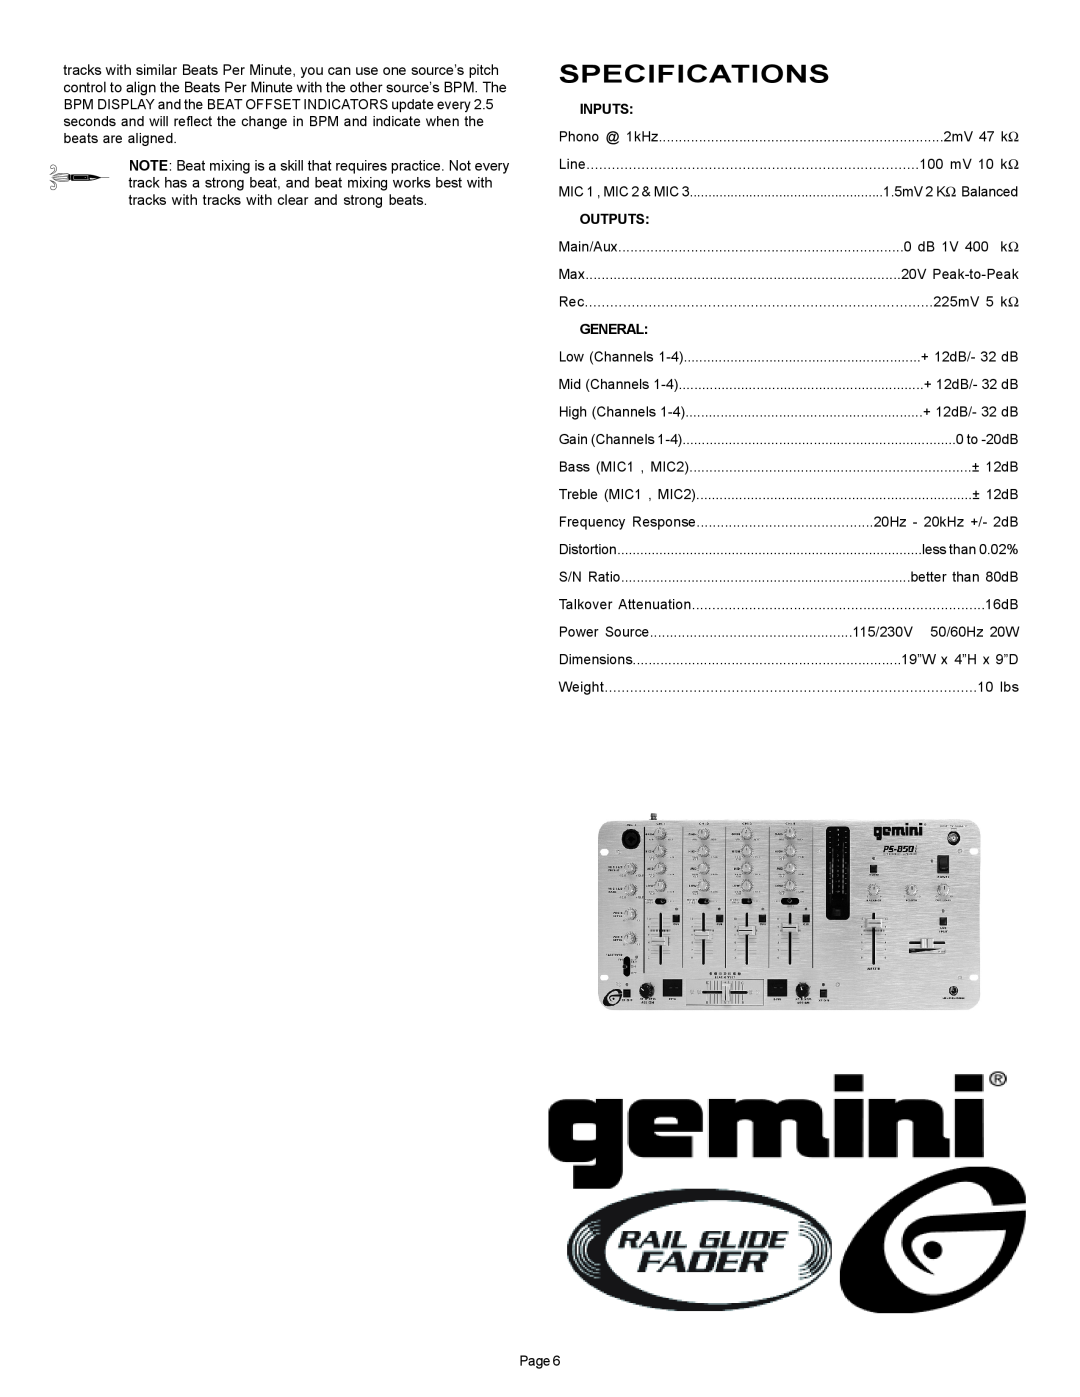 Gemini PS-850i manual Specifications, Inputs, Outputs, General 